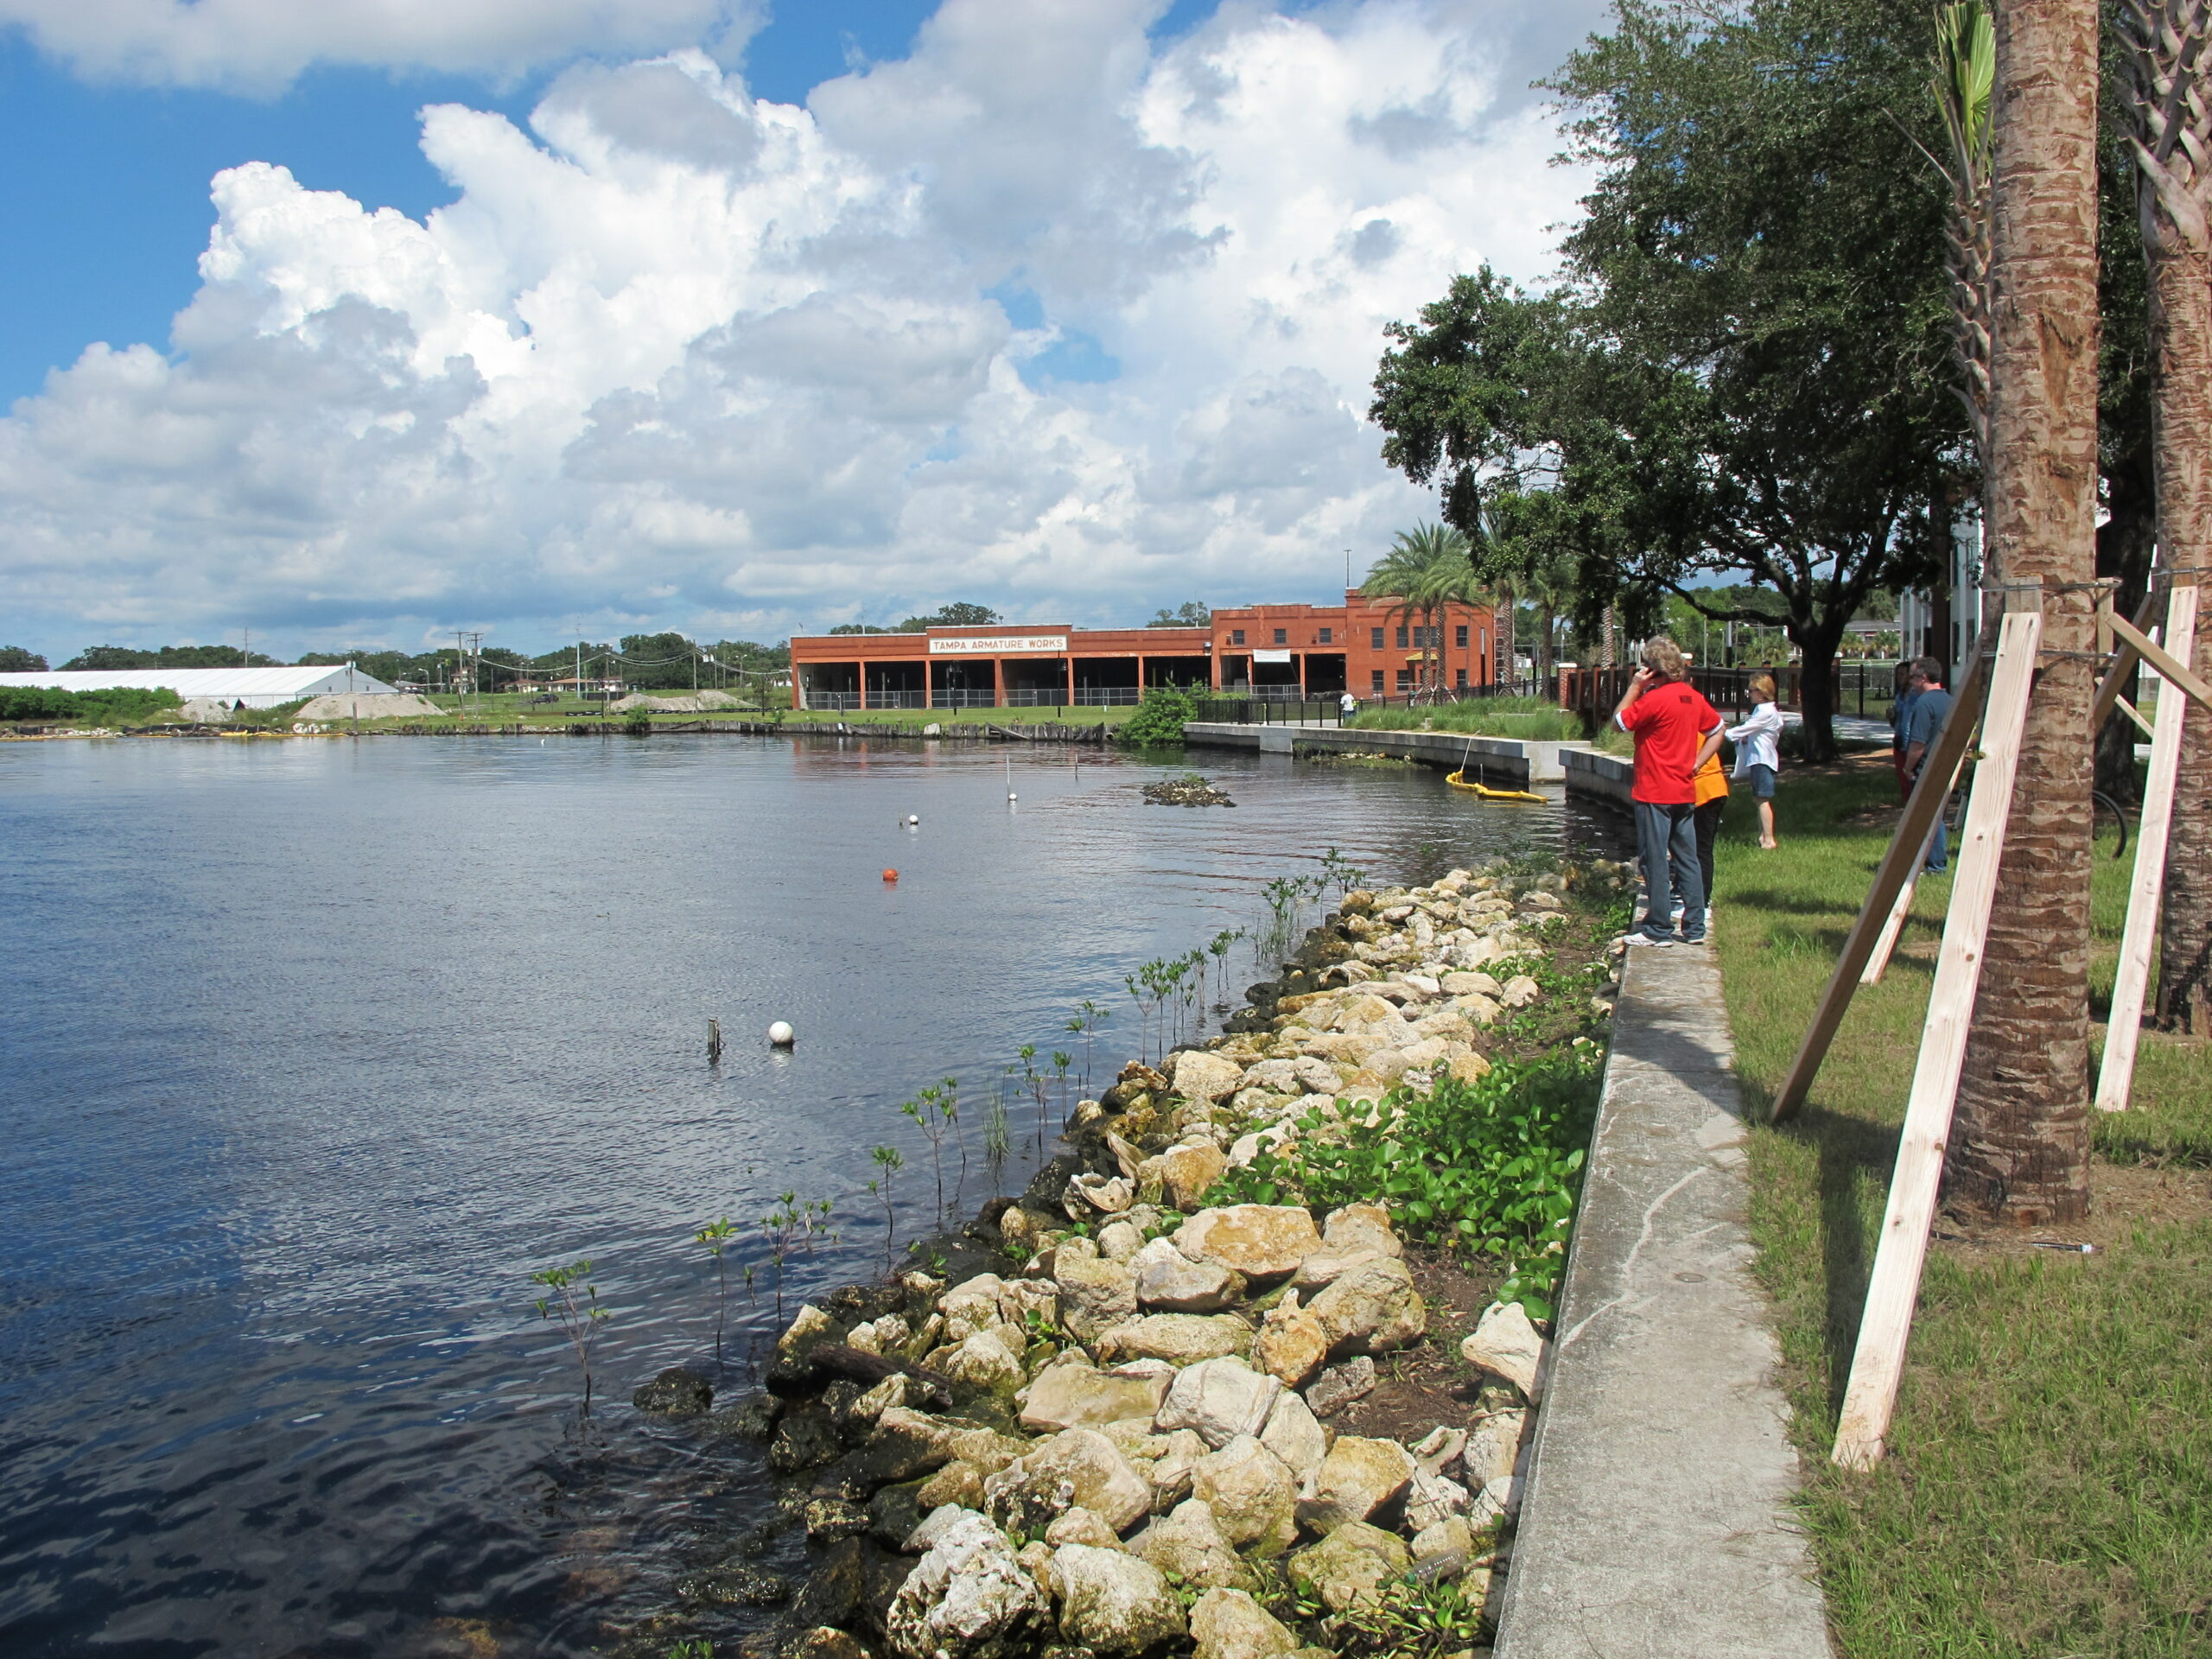 People standing alongside the Hillsborough River at waterworks park.